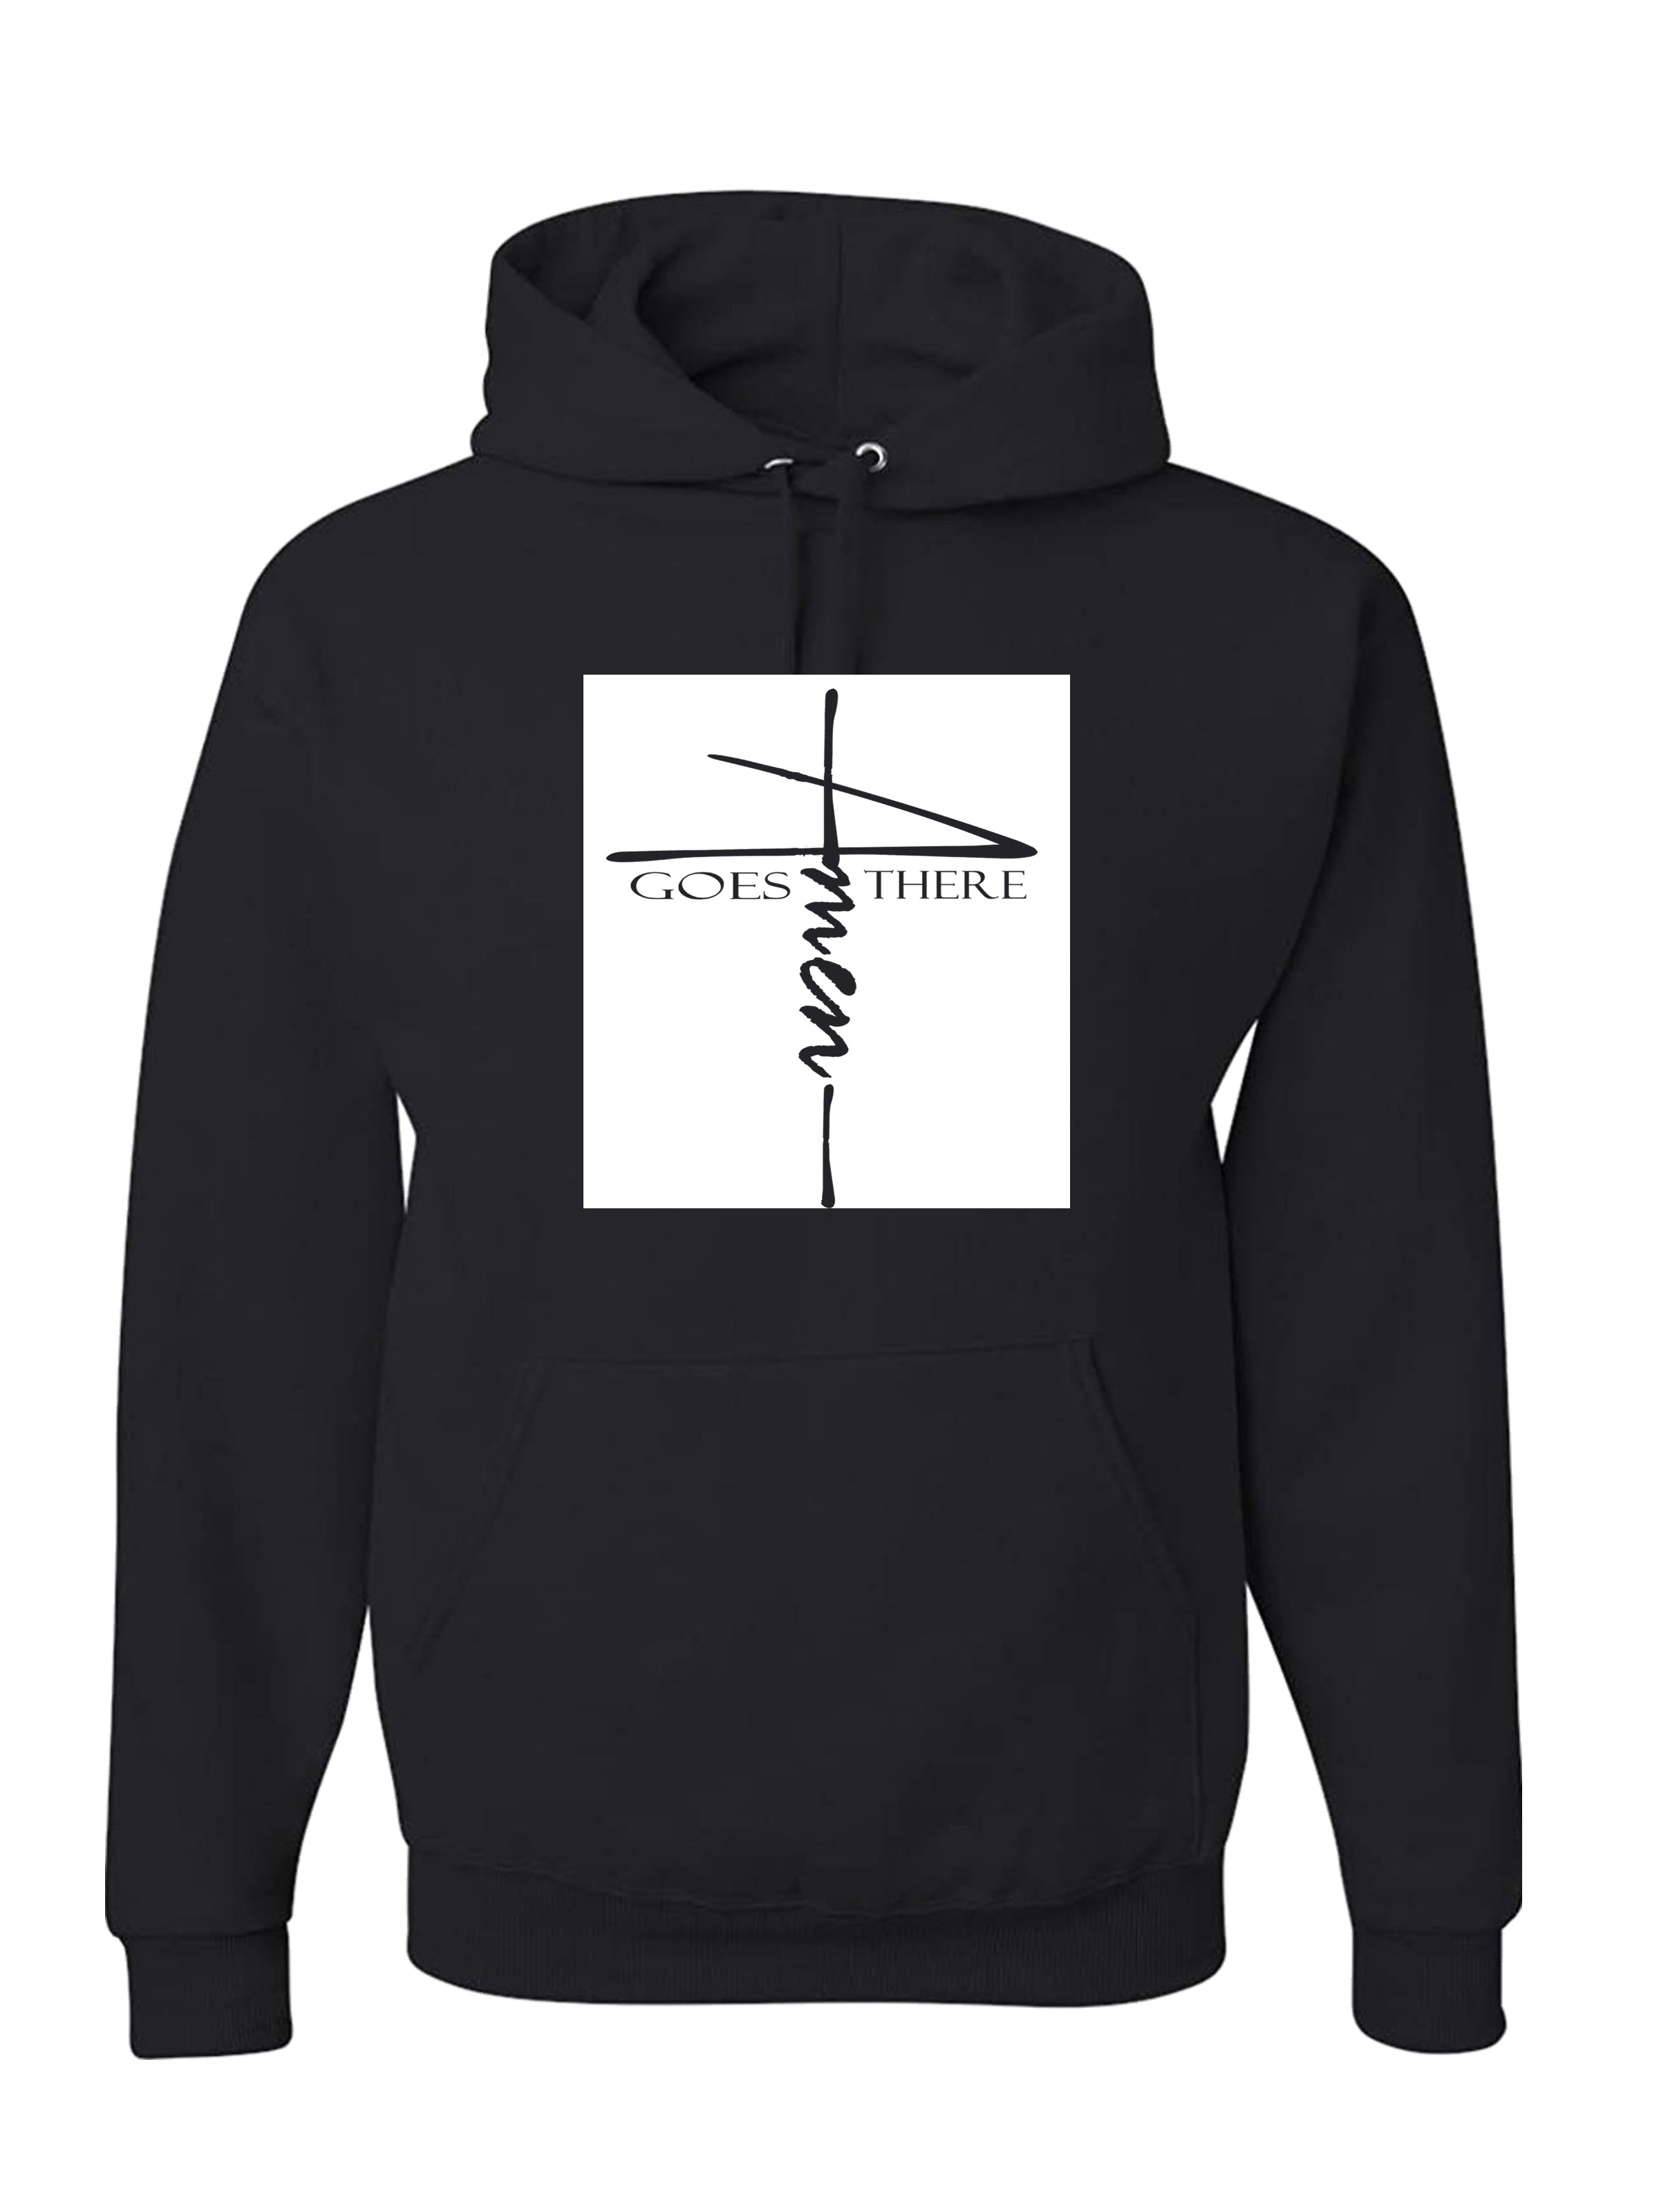 #AmenGoesThere (BOXX) Hoodie